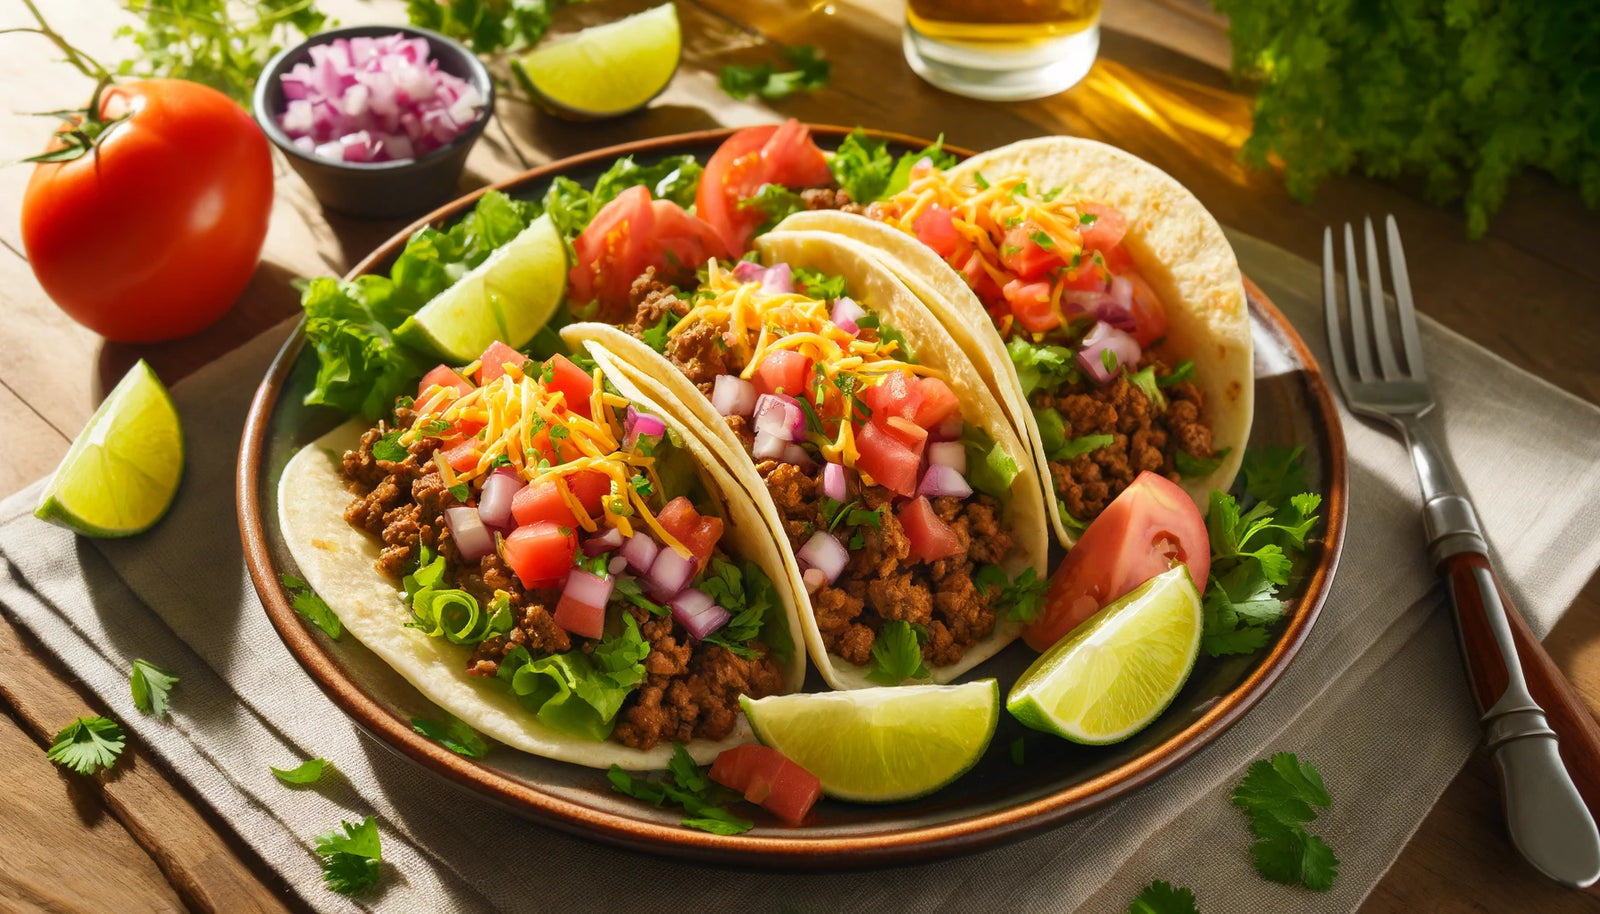 Grilled Ground Beef Taco Recipe on the Arteflame Grill